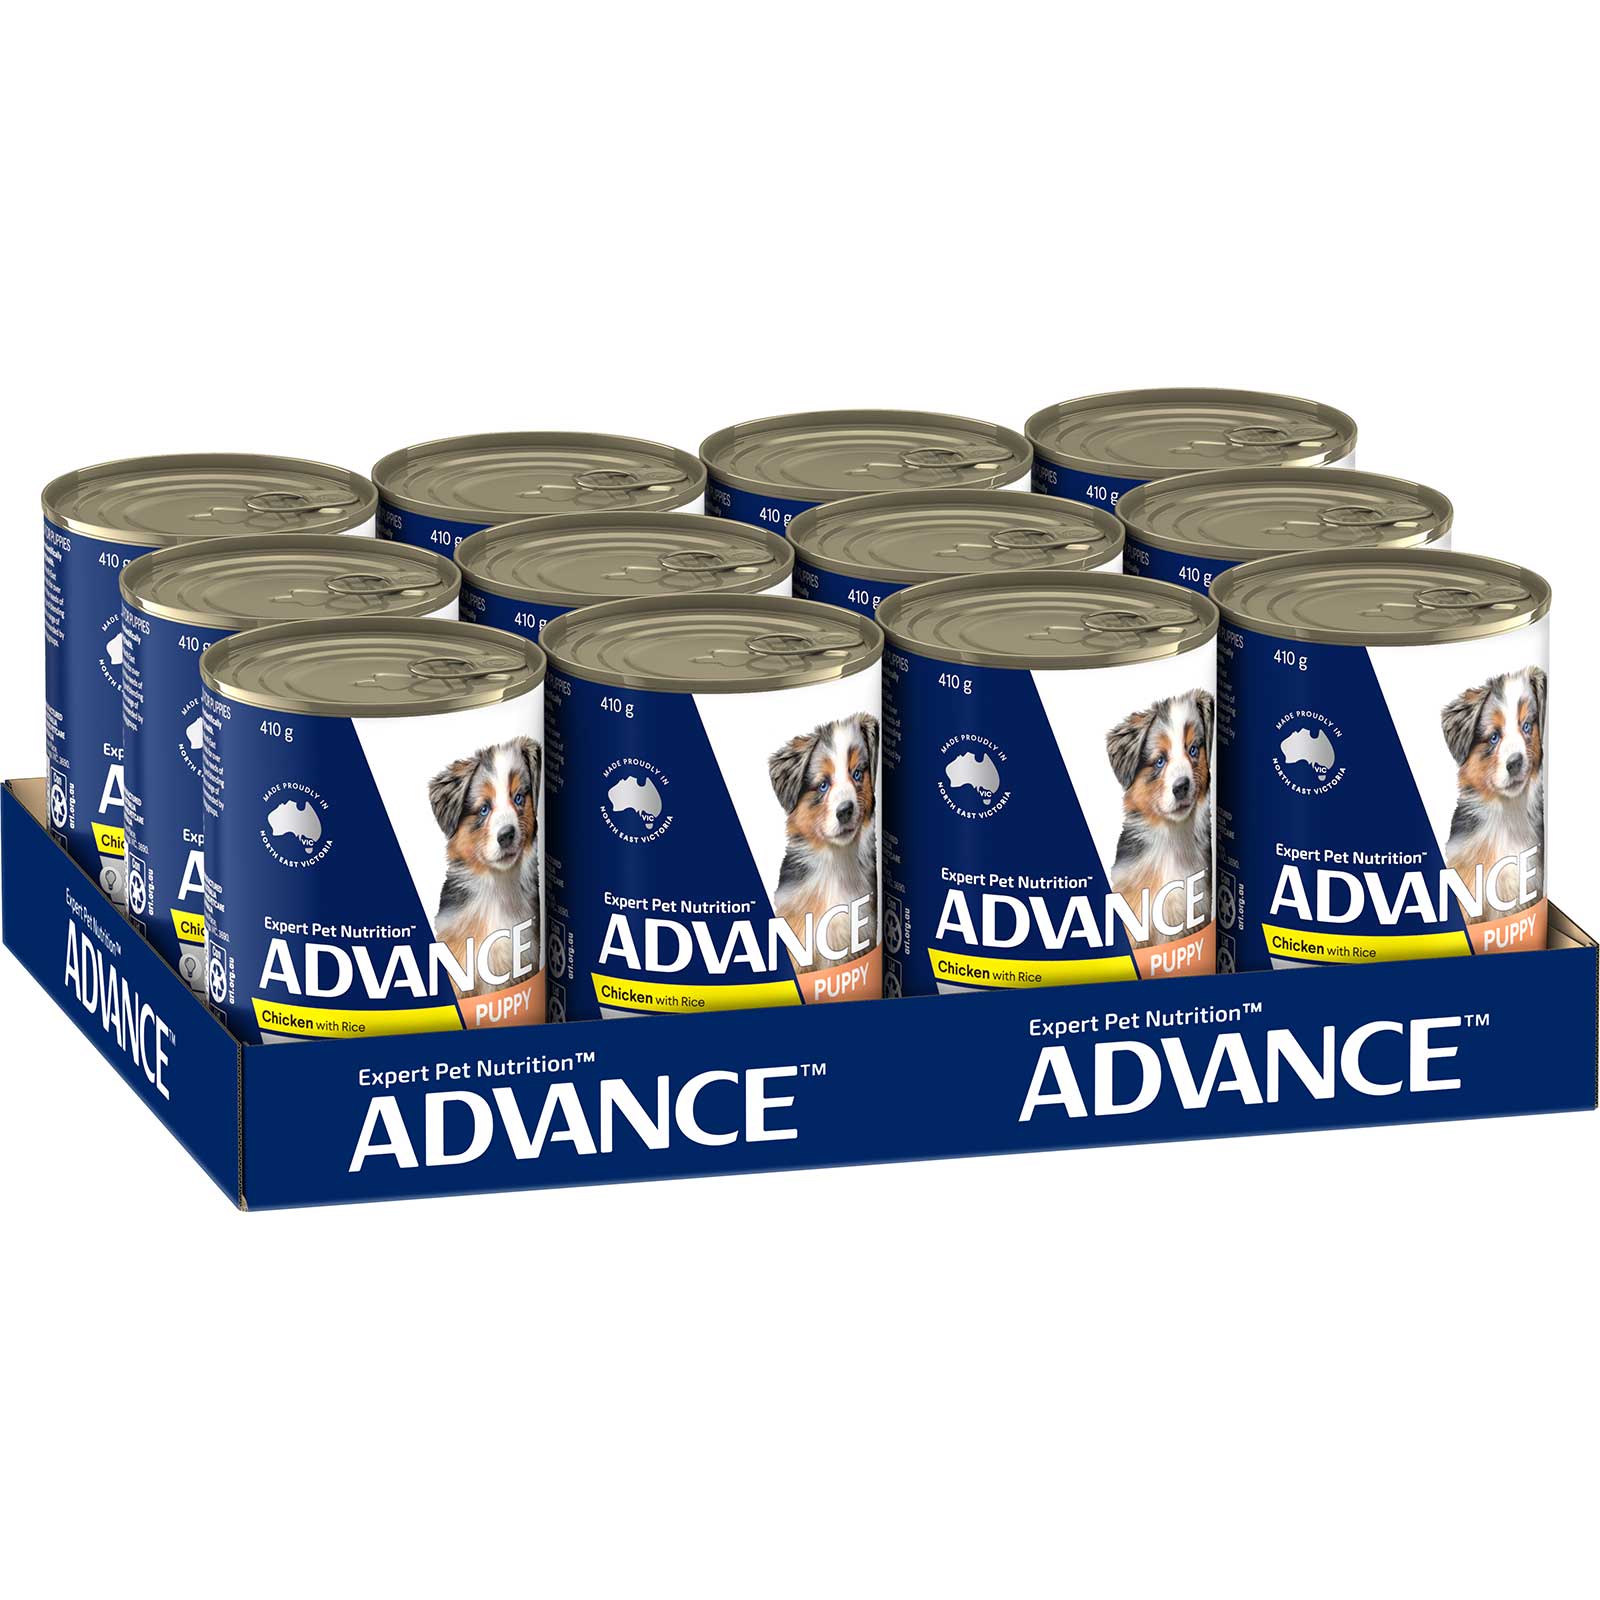 Advance Dog Food Can Puppy All Breed Chicken with Rice